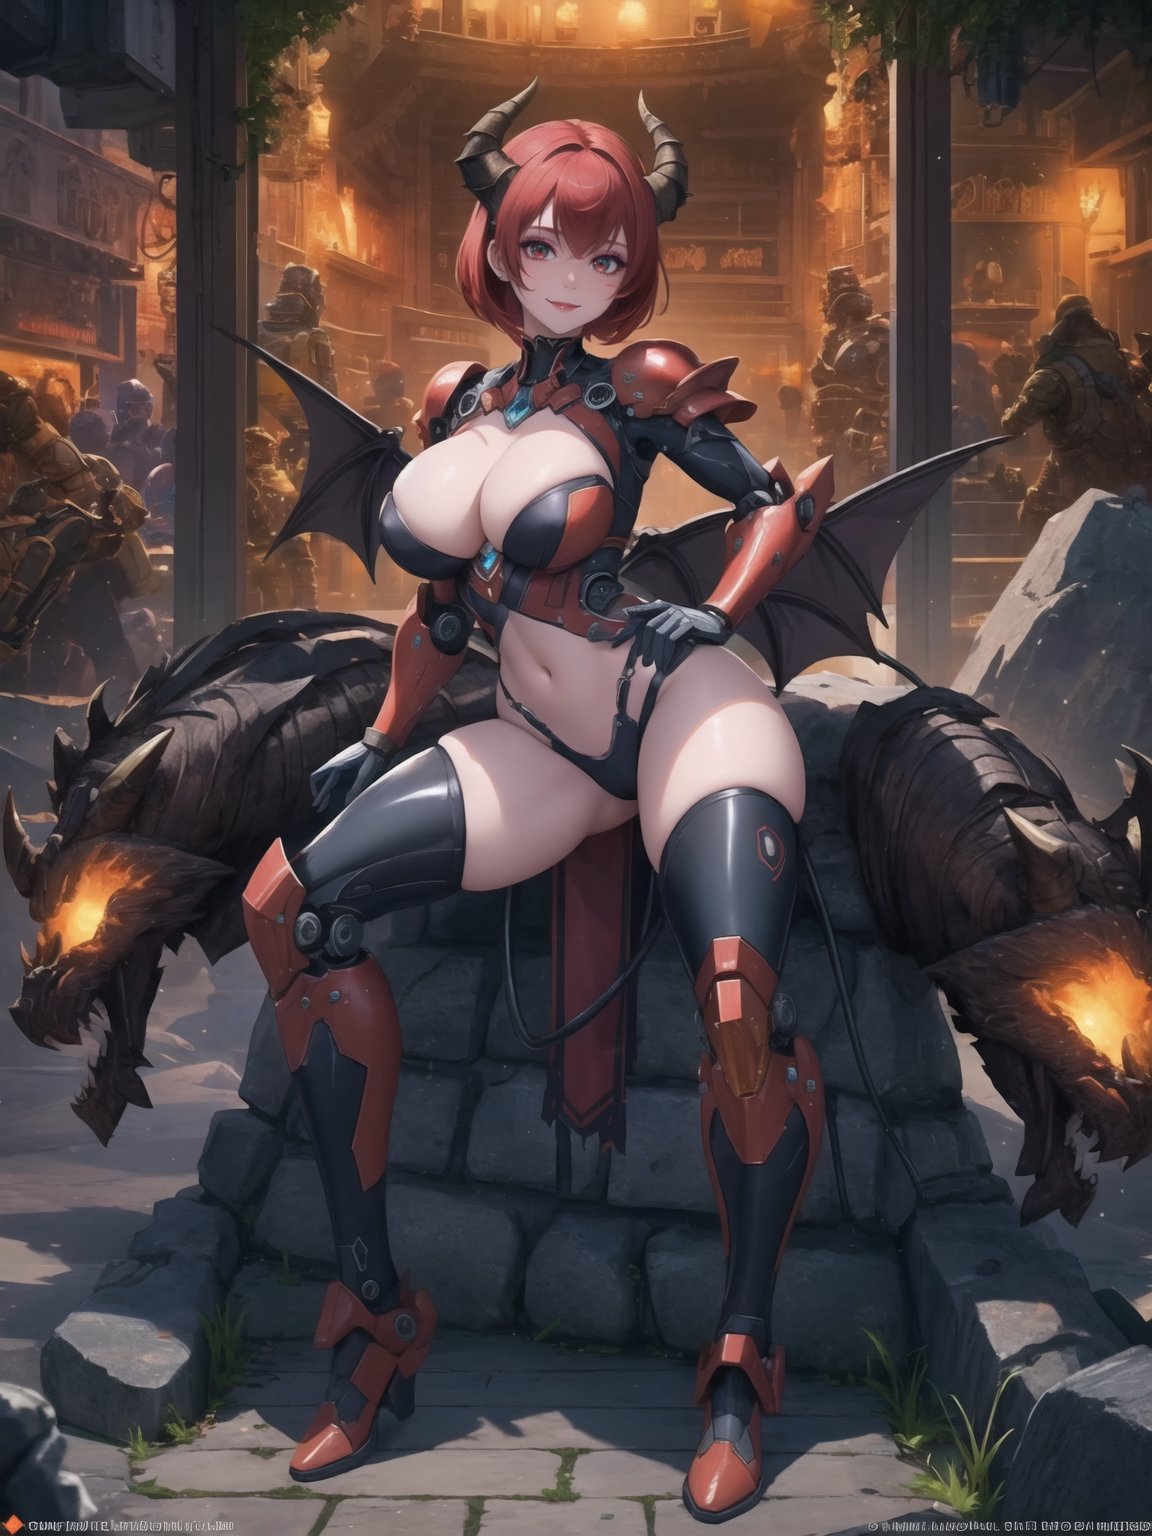 ((A demon woman)) with giant breasts, wearing mecha+robotic armor with red parts, all black armor, she has horns (wearing a helmet), red hair, short hair, hair with bangs in front of her eyes. She is in the underworld at night, with many large stone structures machines, monsters, large metal structures, warcraft, 16K, UHD, best possible quality, ultra detailed, best possible resolution, ultra technological, futuristic, robotic. The image is captured using Unreal Engine 5 and professional photography. She is in a sensual pose with interaction and leaning on anything + object + on something + leaning against + perfect_thighs, perfect_legs, perfect_feet. The image shows her full body with more detail and better hands.